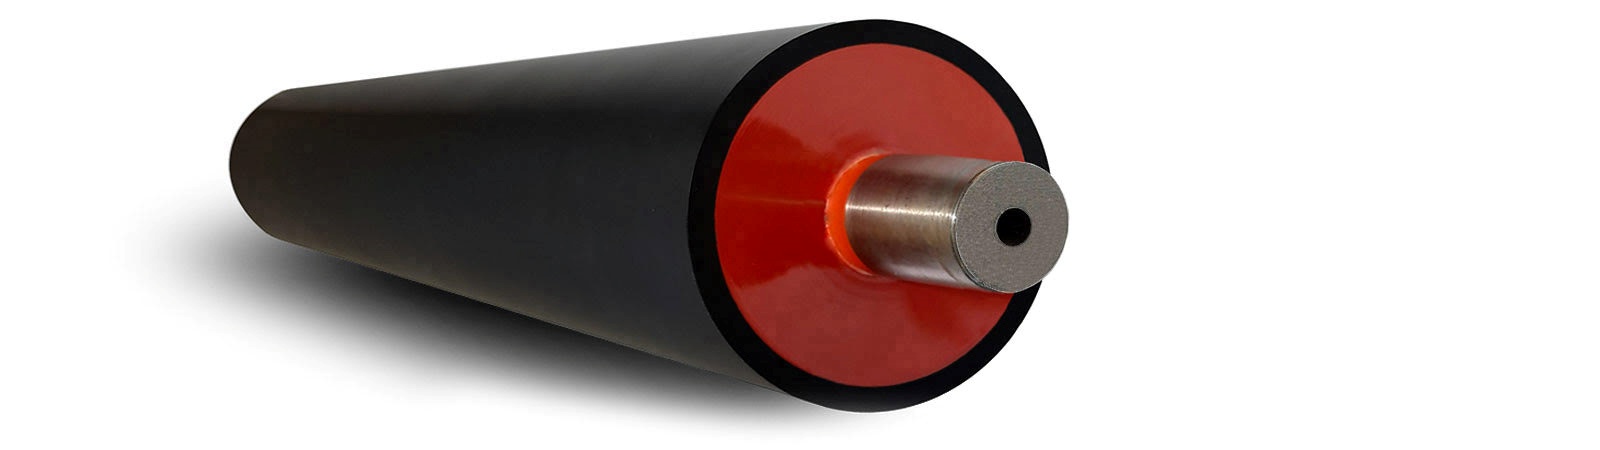 Electrostatic Assist Rubber Covering - NWRS